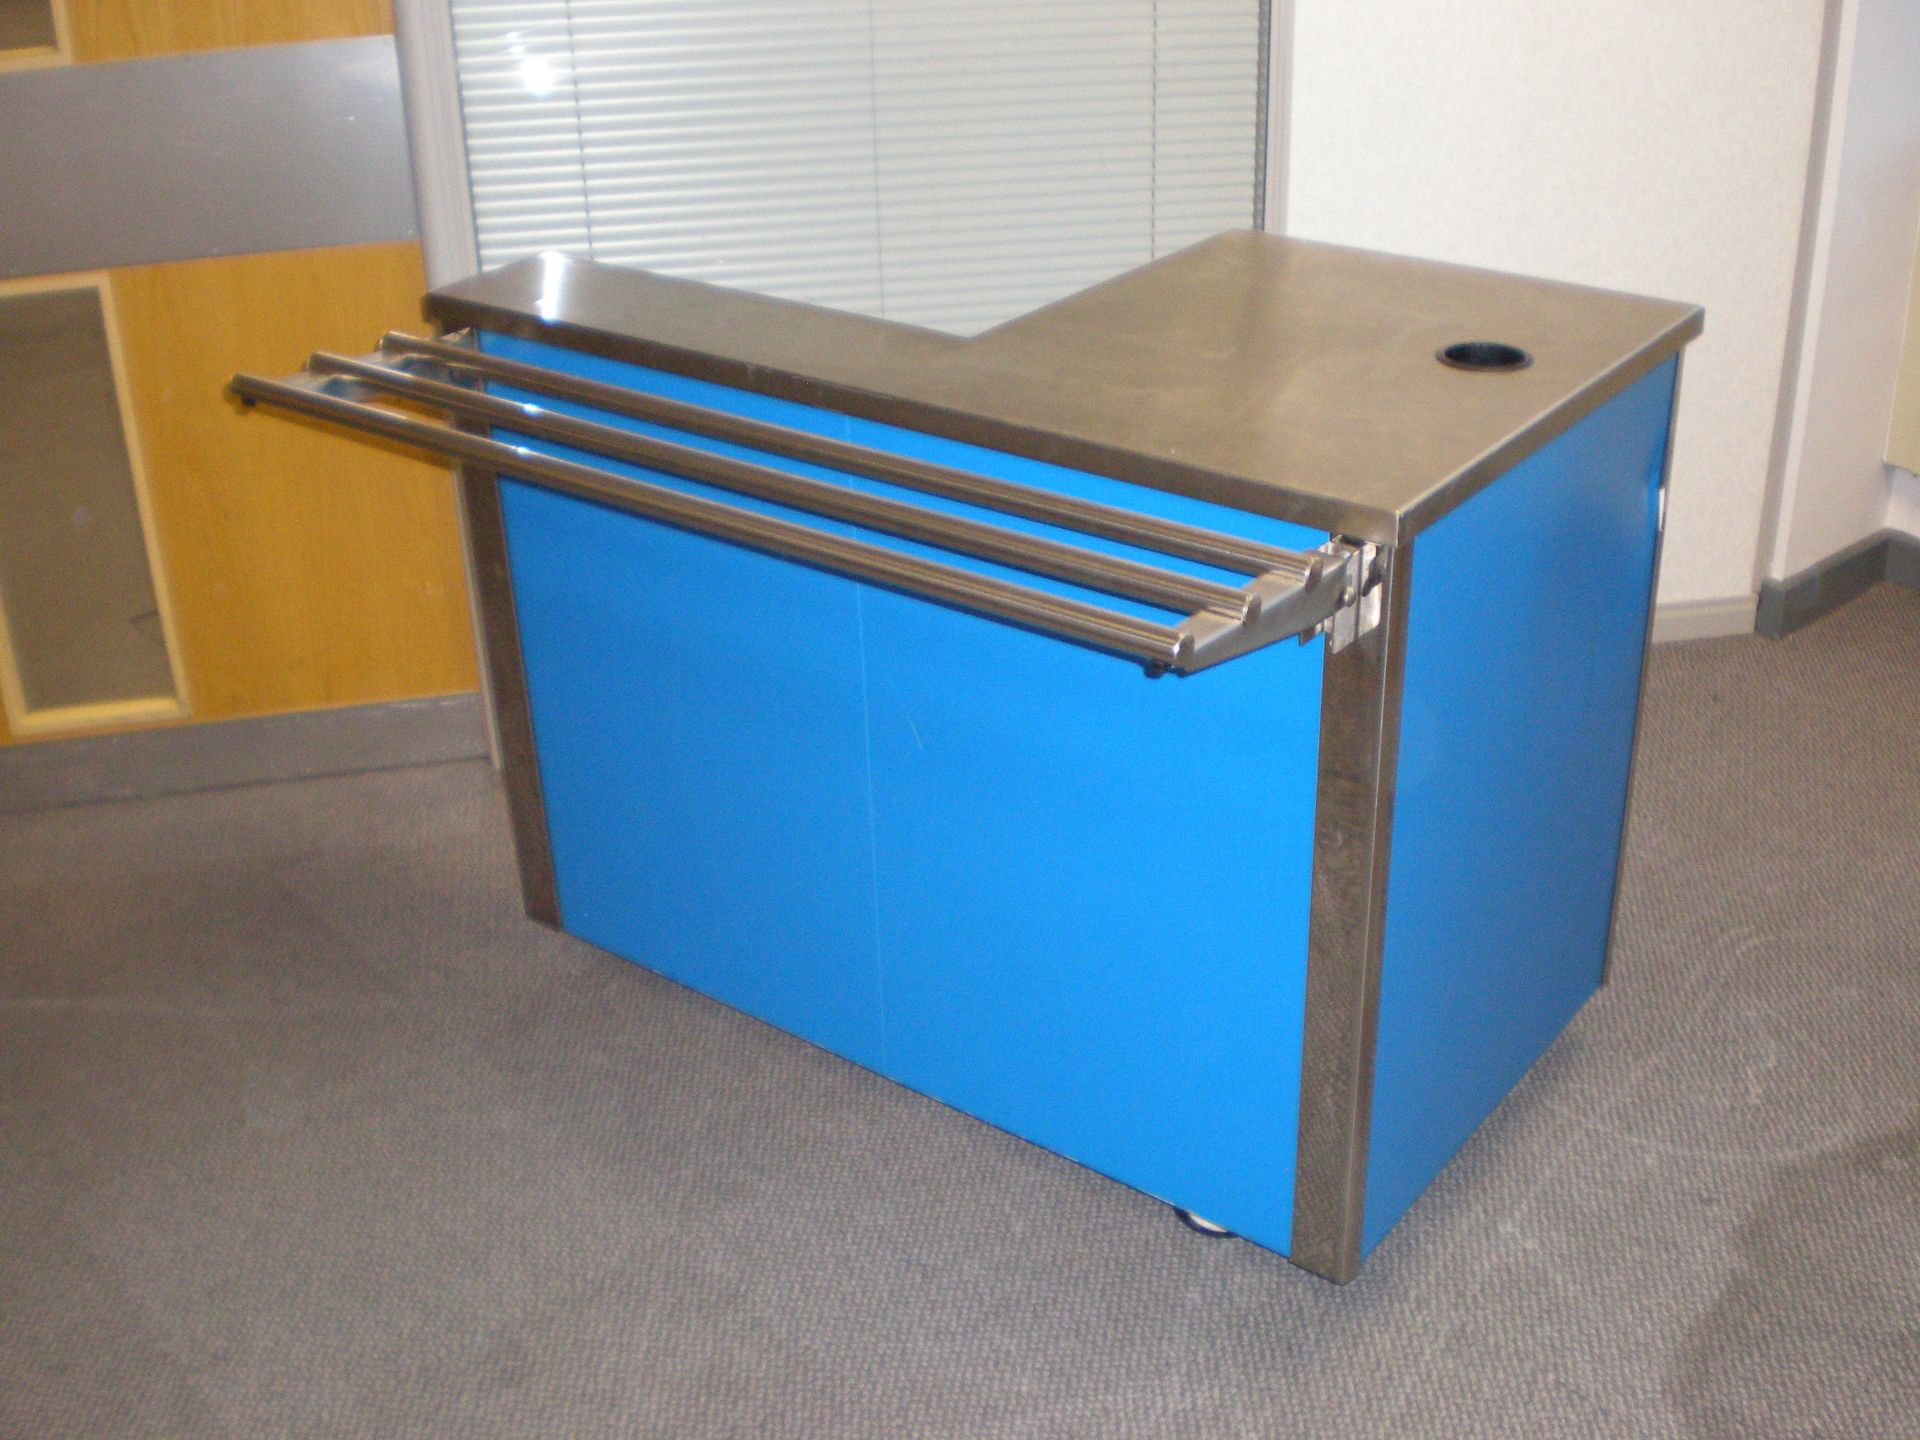 Canteen Stainless Steel Trolly Pay Station For Till, On Wheels, Collapsable Shelf For Trays, 2